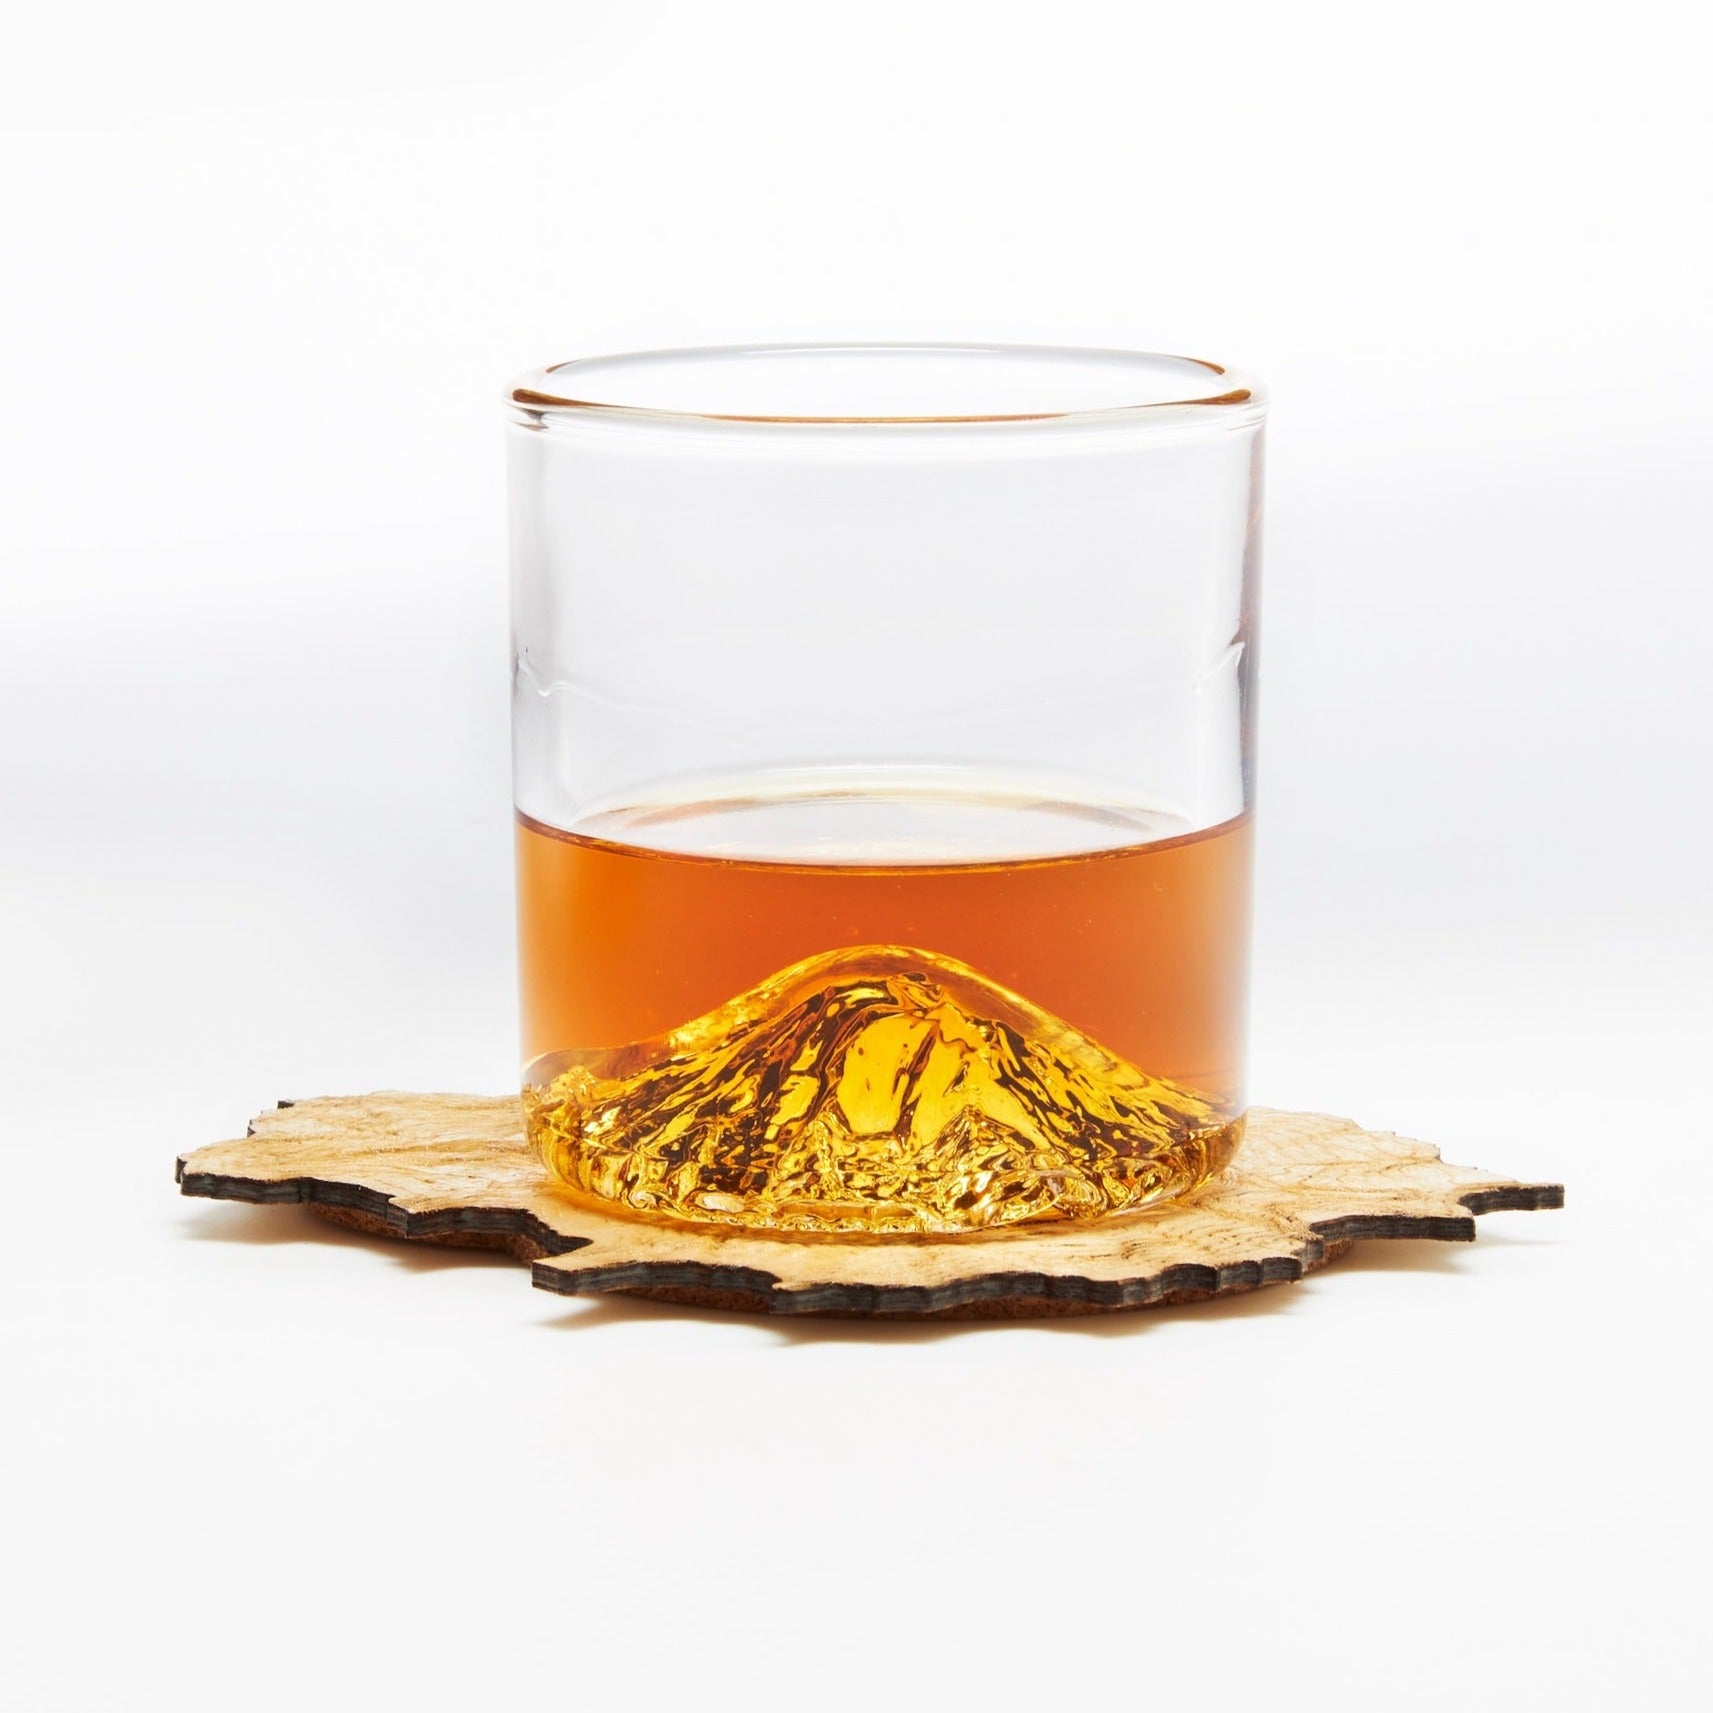 Norlan's Snifter-Meets-Tumbler Whisky Glass - COOL HUNTING®